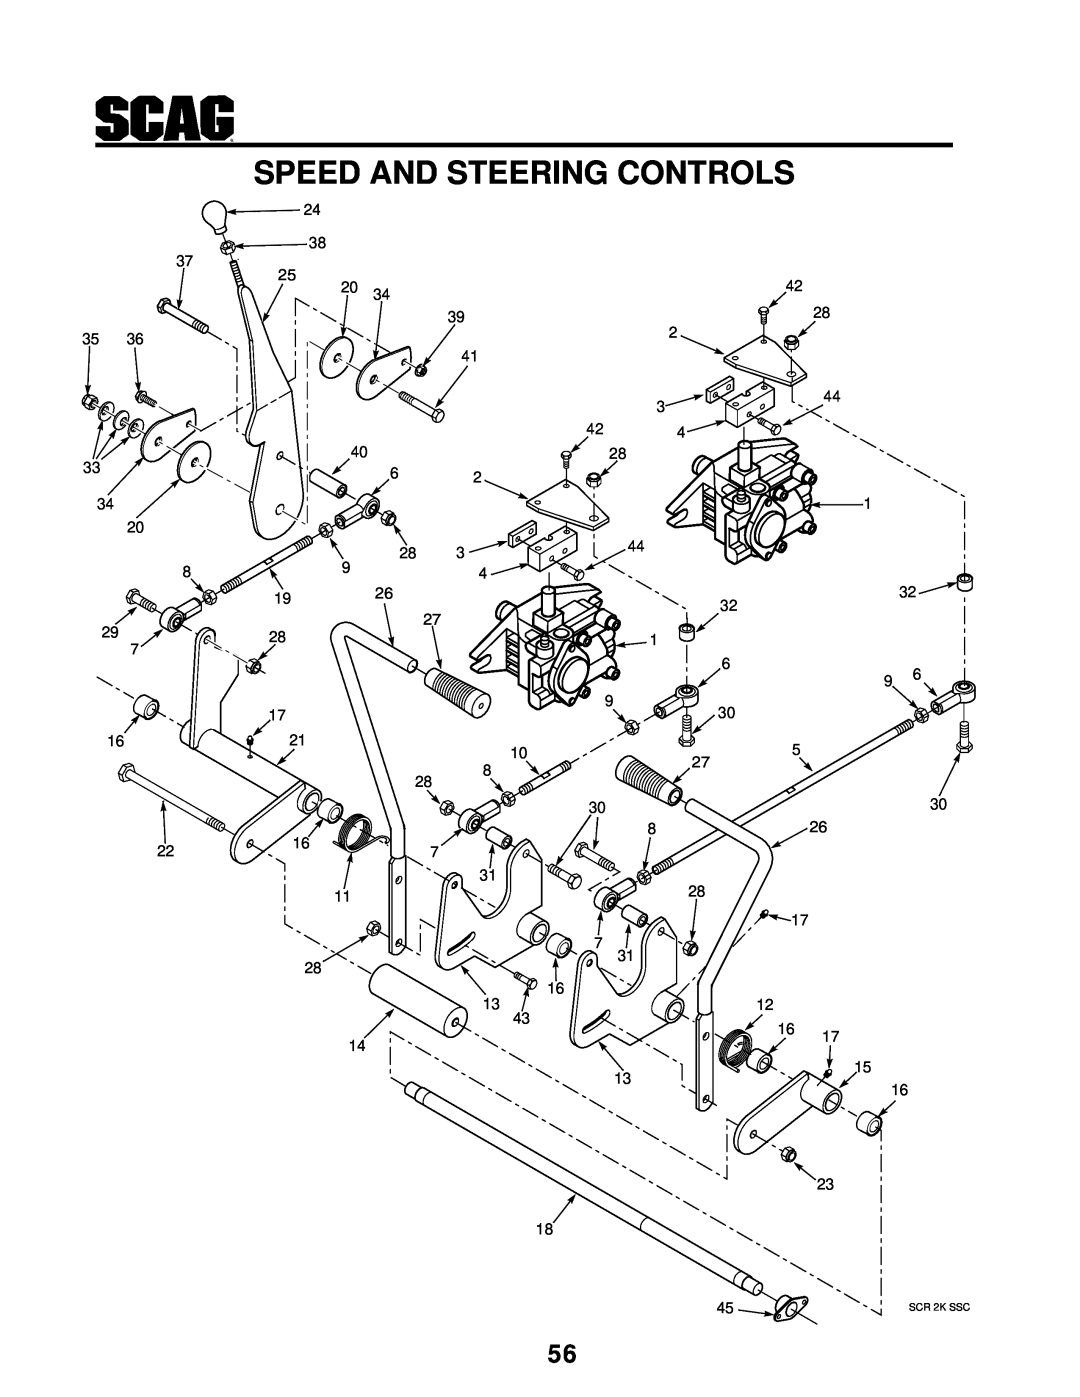 MB QUART manual Speed And Steering Controls, SCR 2K SSC 